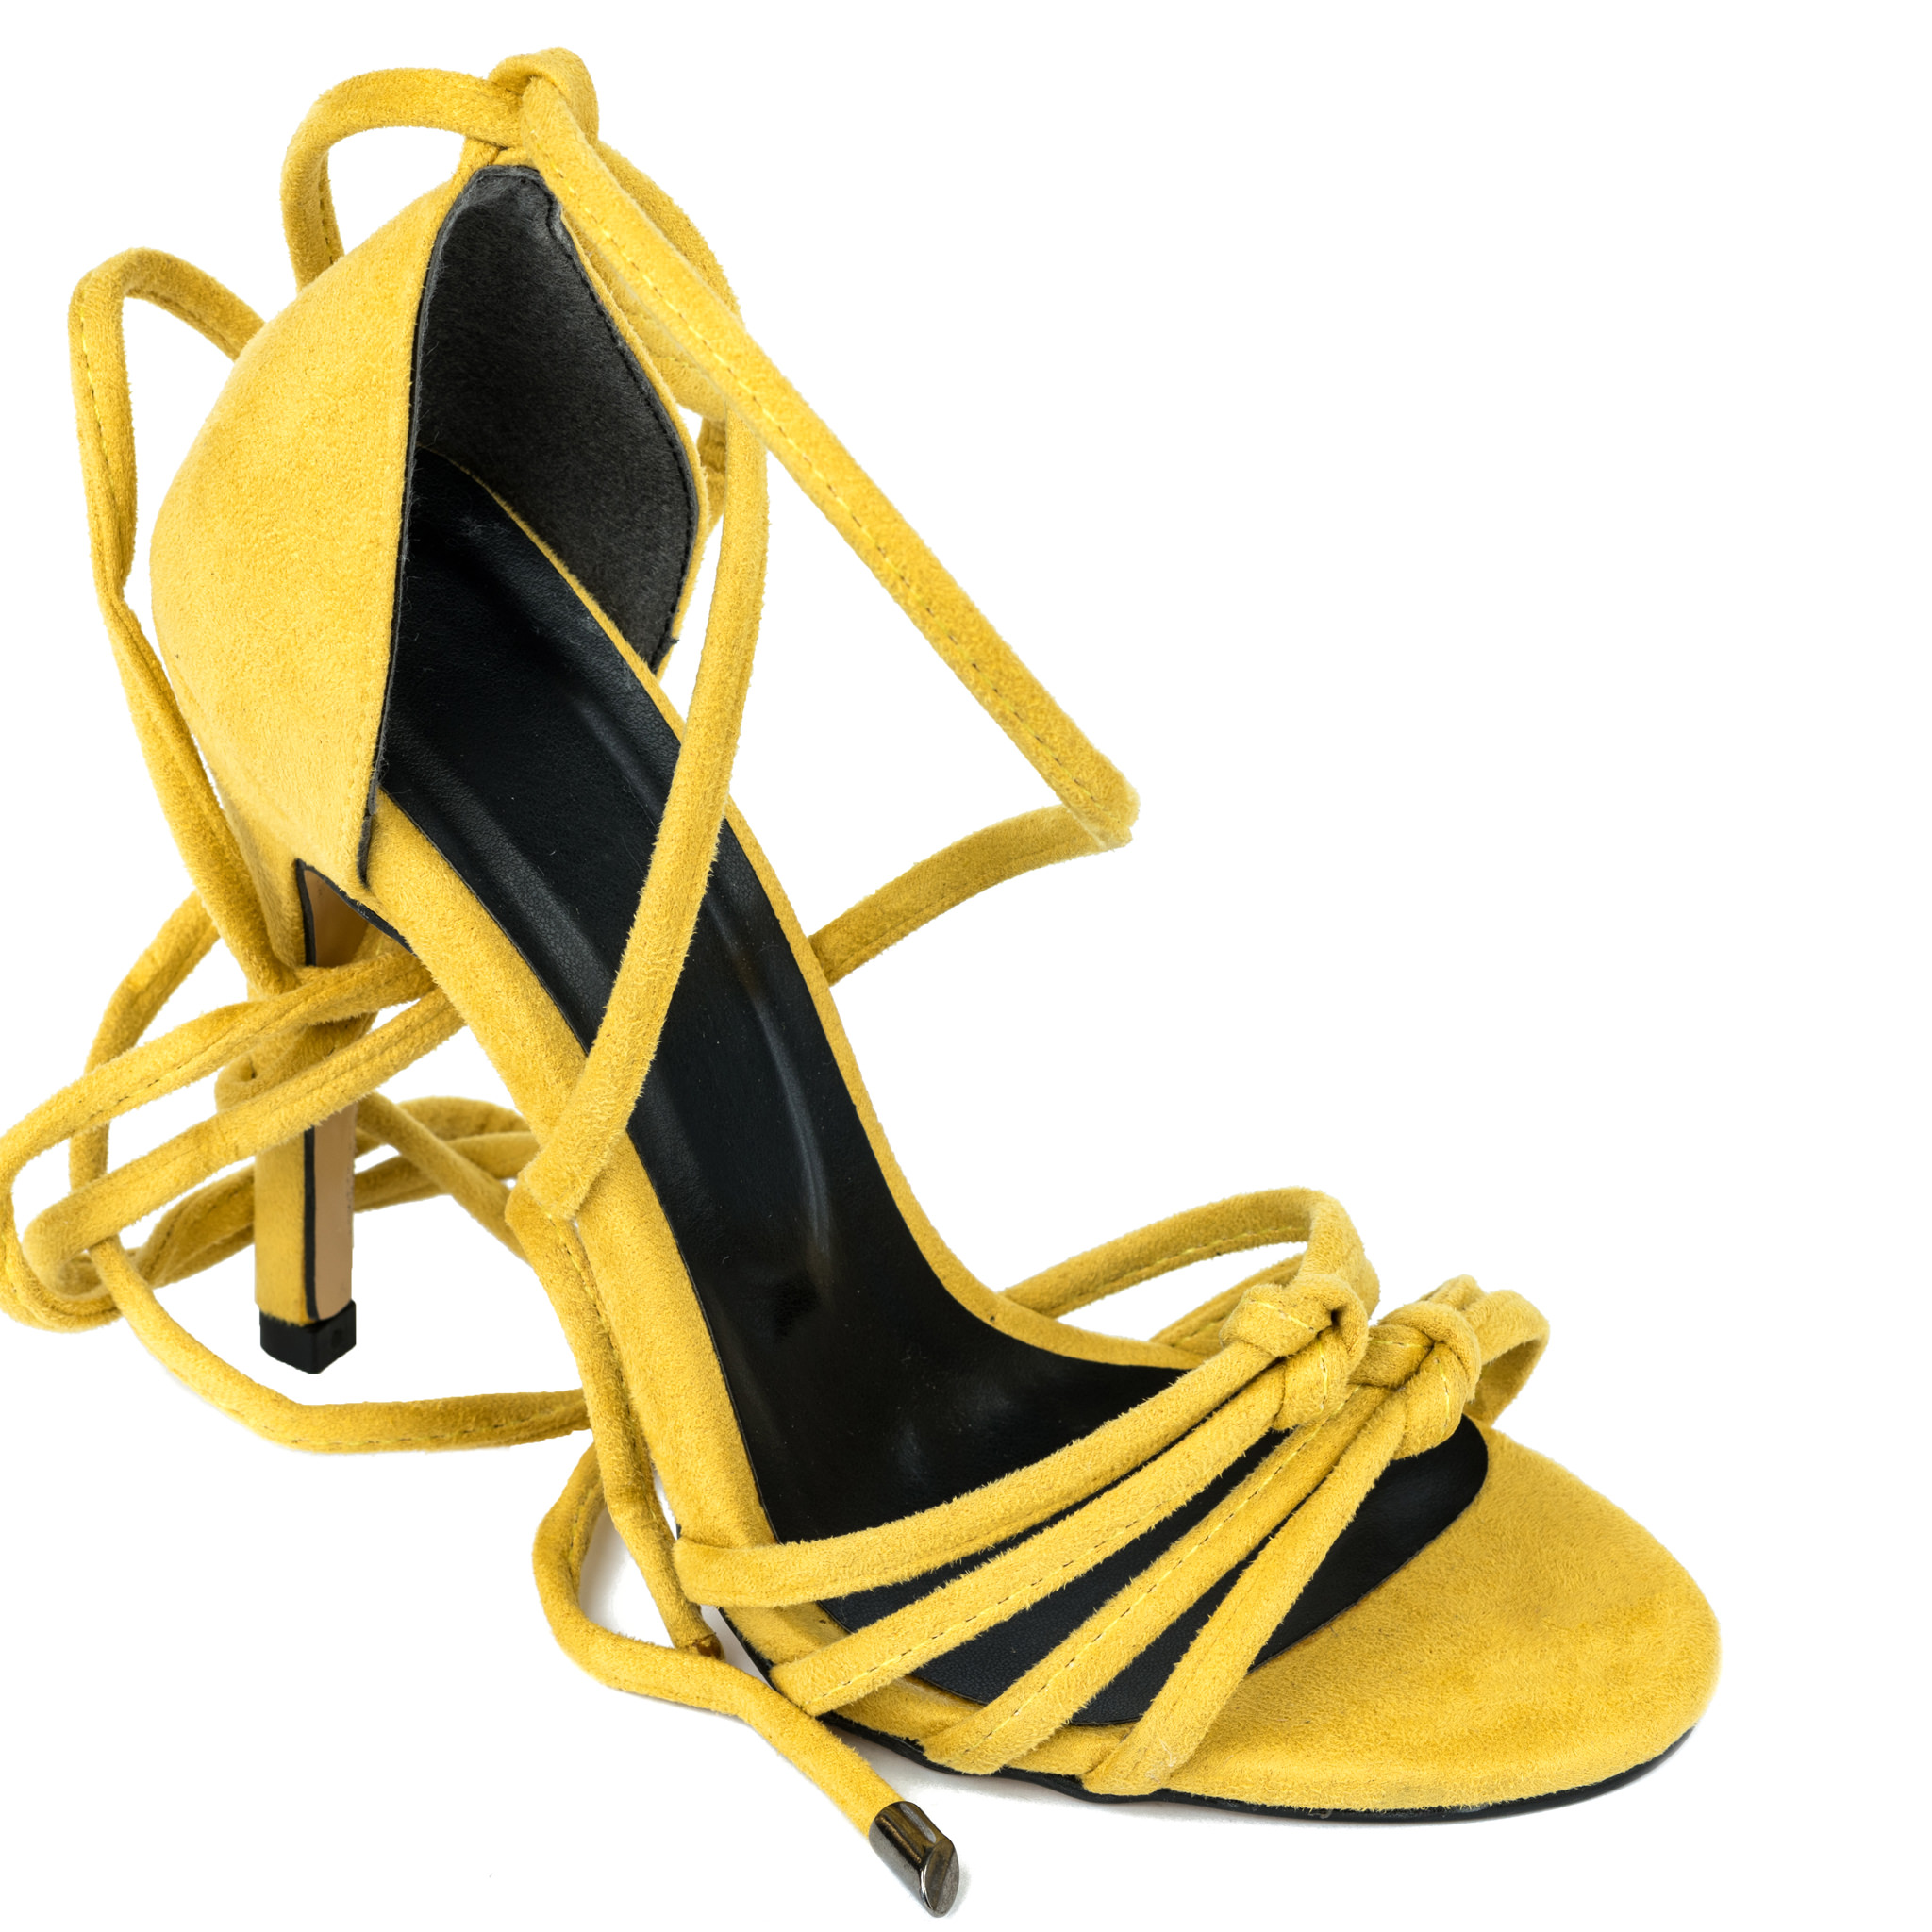 VELOUR LACE UP SANDALS WITH THIN HEEL - YELLOW